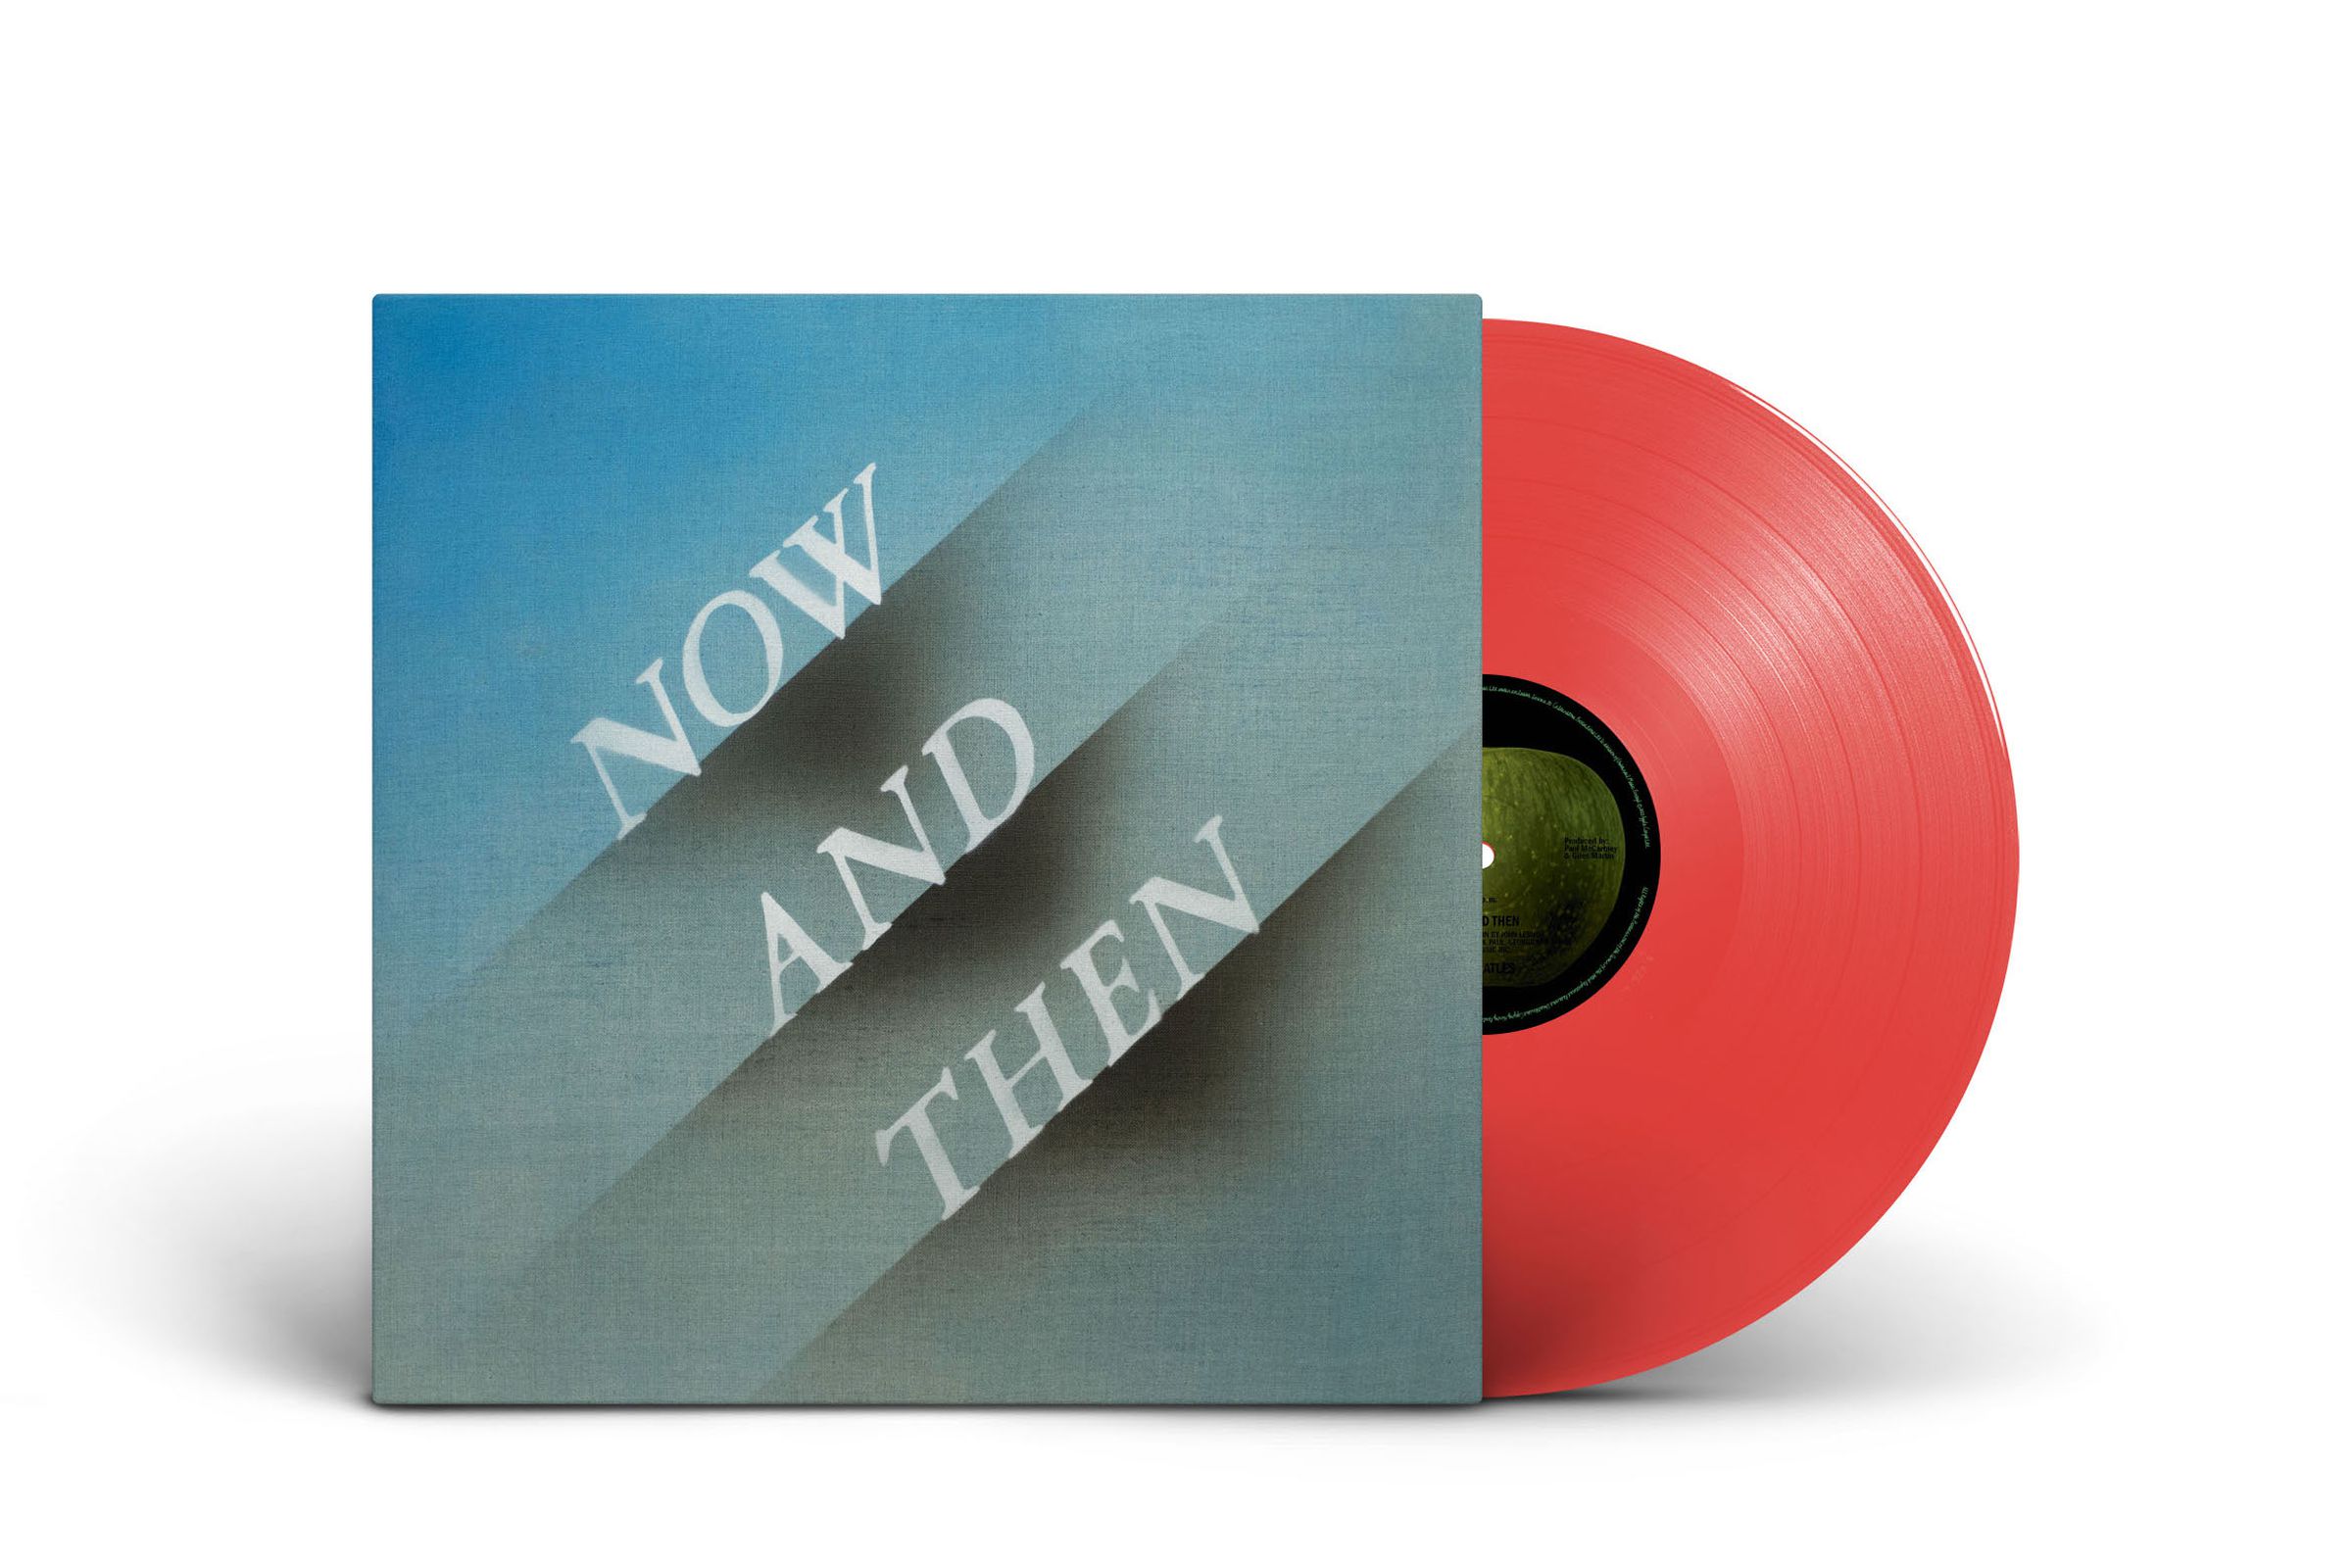 An album cover that reads “Now and Then” along with a red vinyl record with a black center. Both are standing up against a white backdrop.